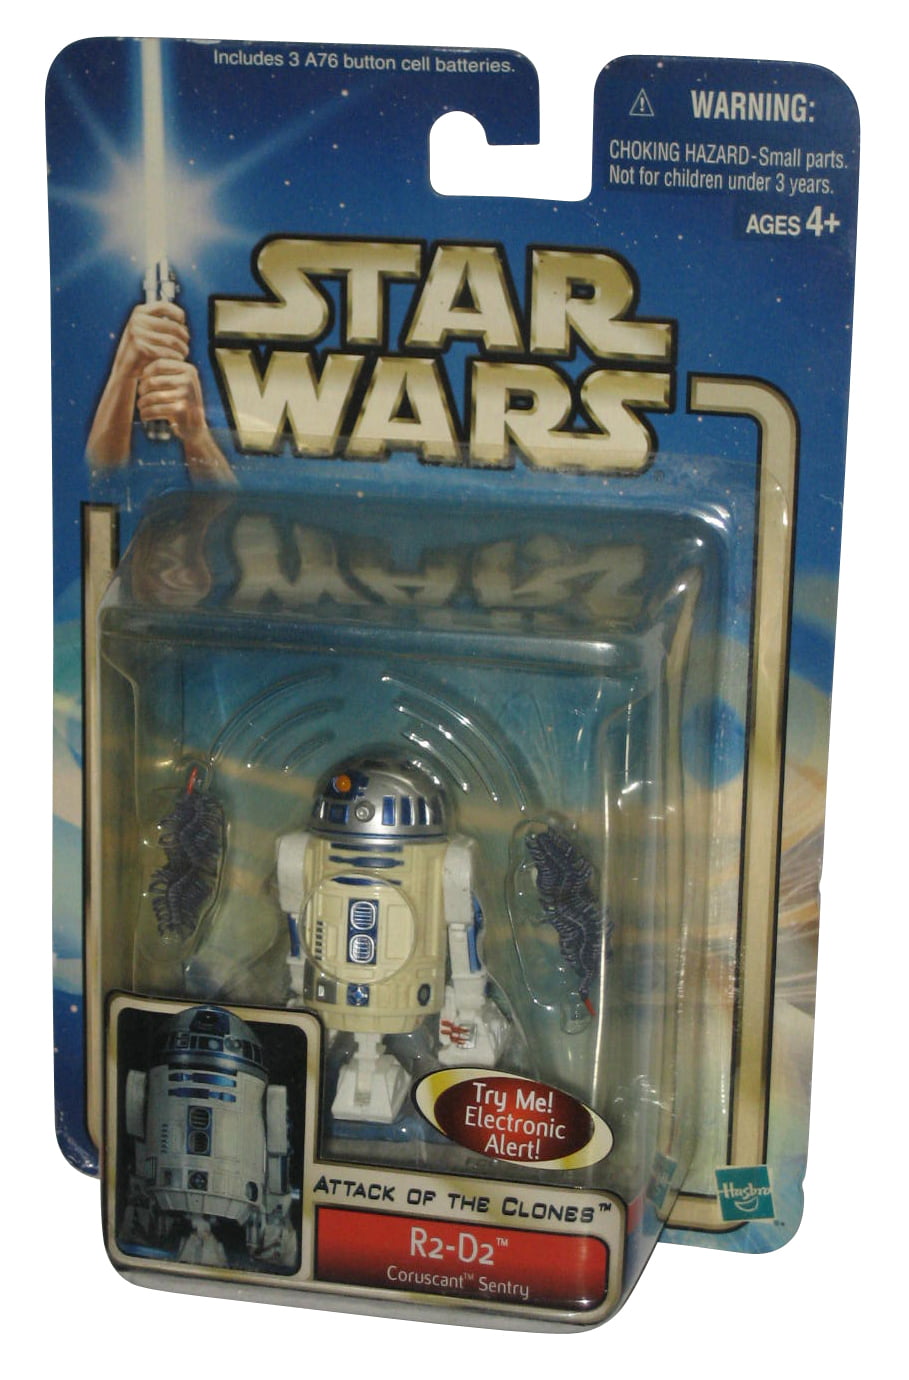 BOXED STAR WARS ATTACK OF THE CLONES ELECTRONIC R2-D2 HASBRO ACTION FIGURE 